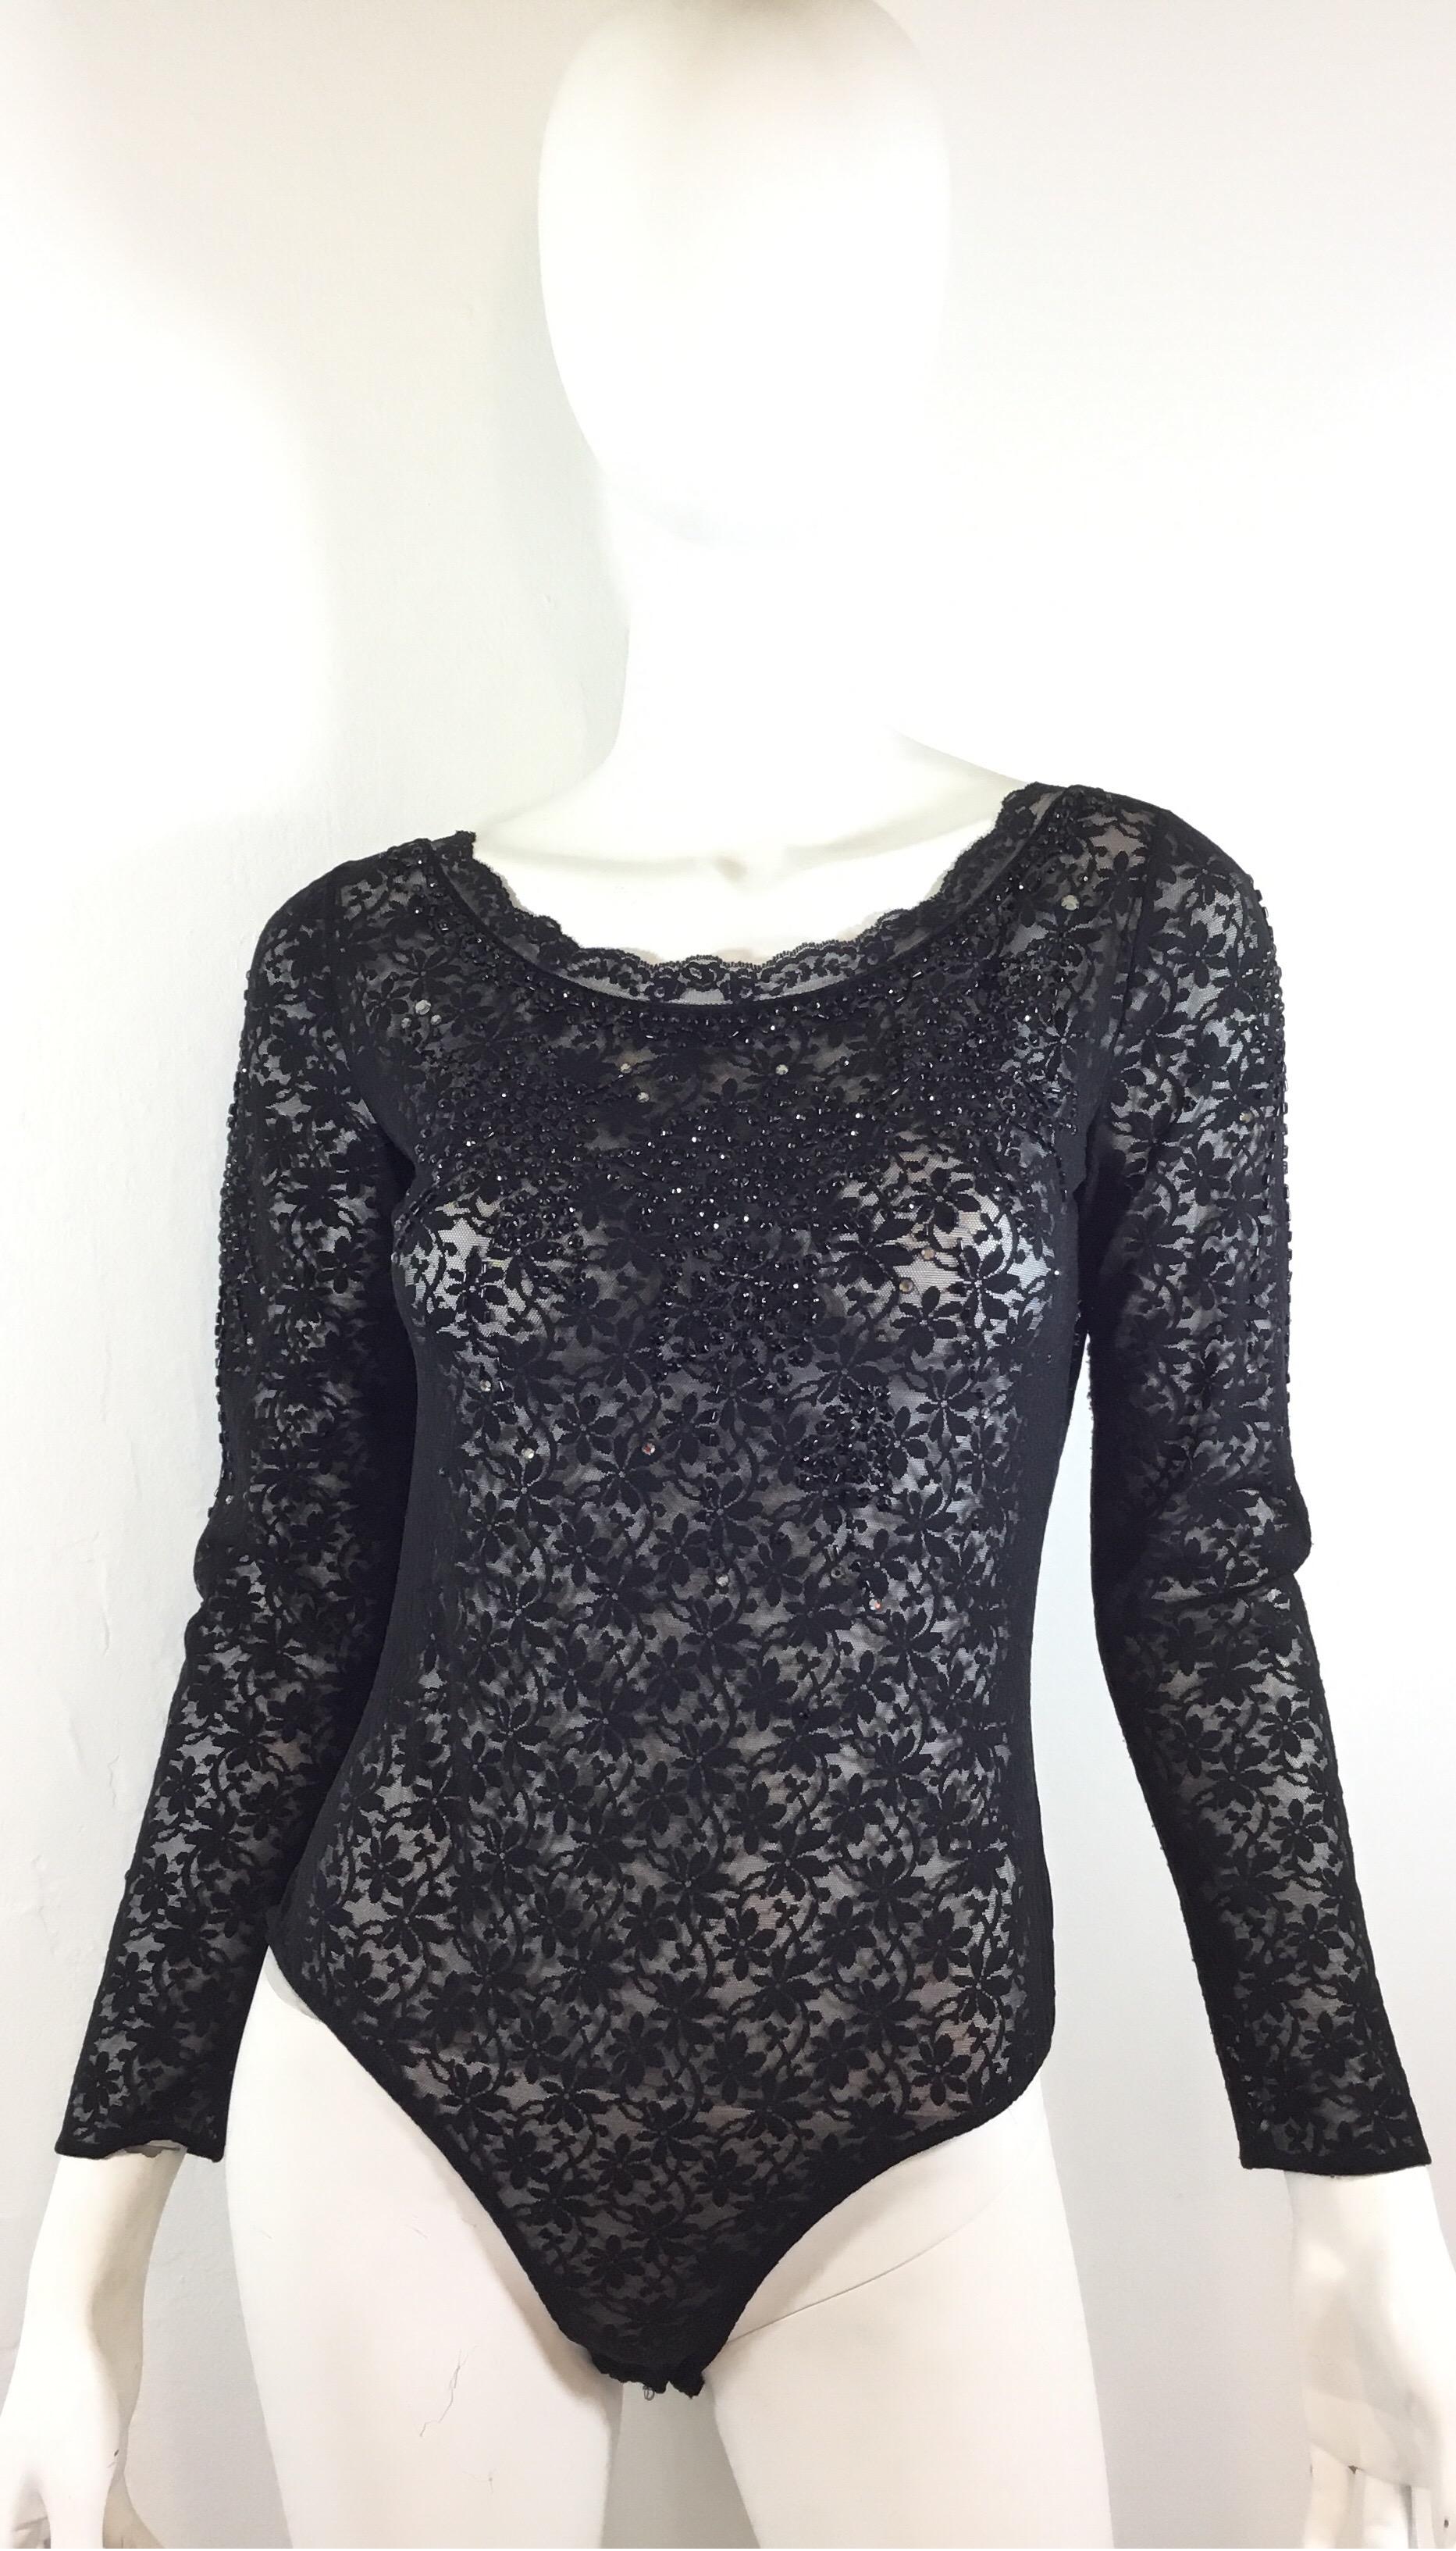 Giorgio Sant’Angelo full lace bodysuit features beading along the front, back, and sleeves. Bodysuit has snap fastenings and a keyhole design at the back with a hook fastening. Labeled size 10. Excellent condition.

Bust 34”, sleeves 21.5”, length